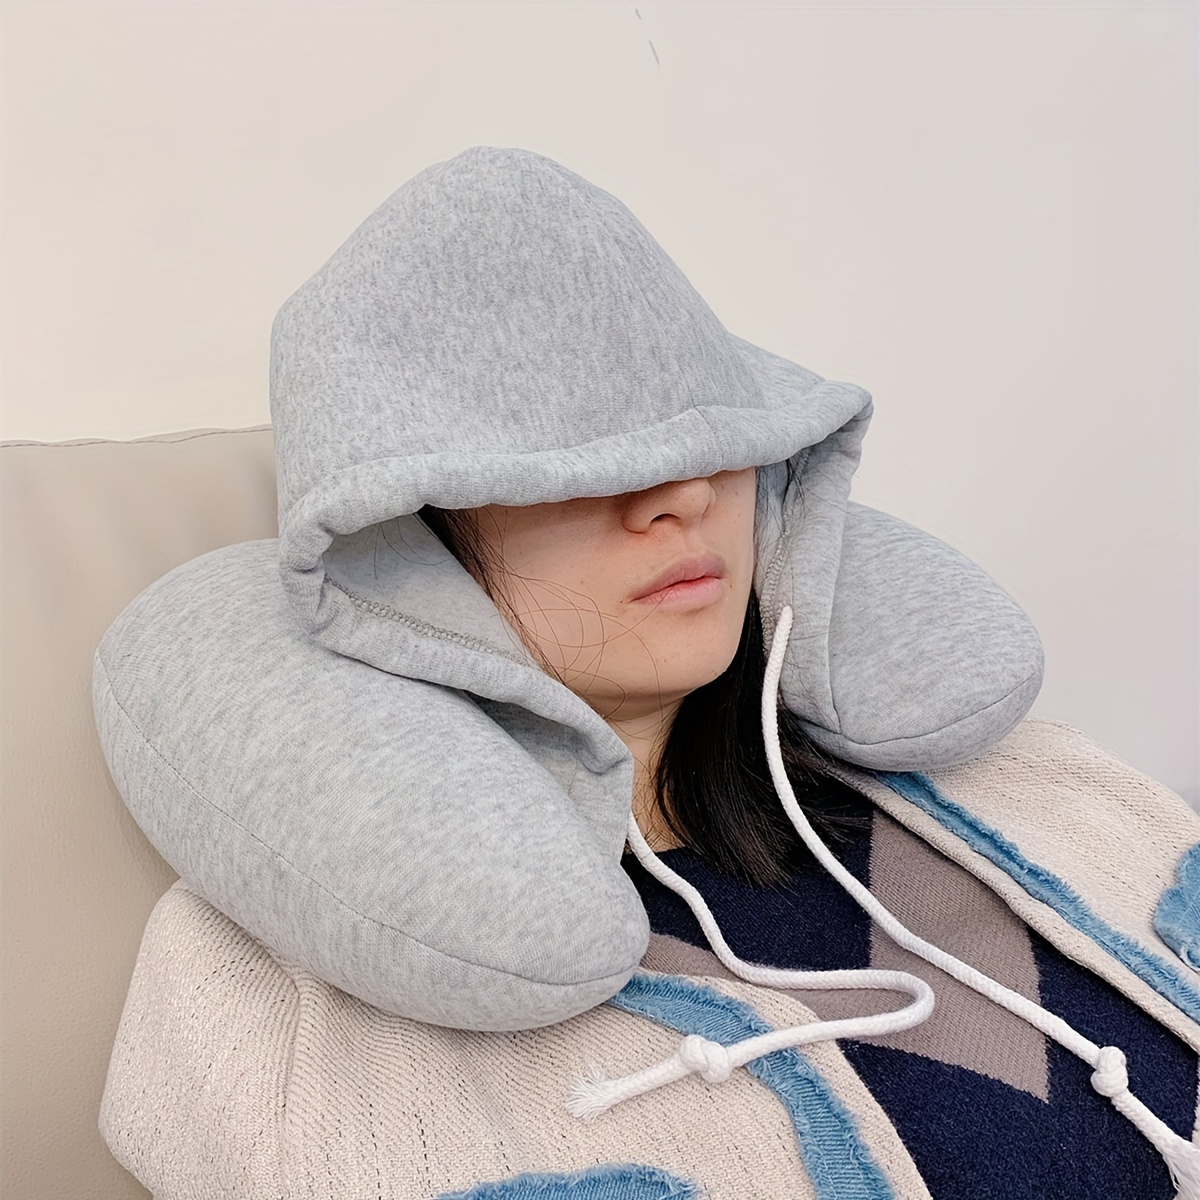 Inflatable Travel Pillow,Multifunction Neck Pillow for Airplane Gray